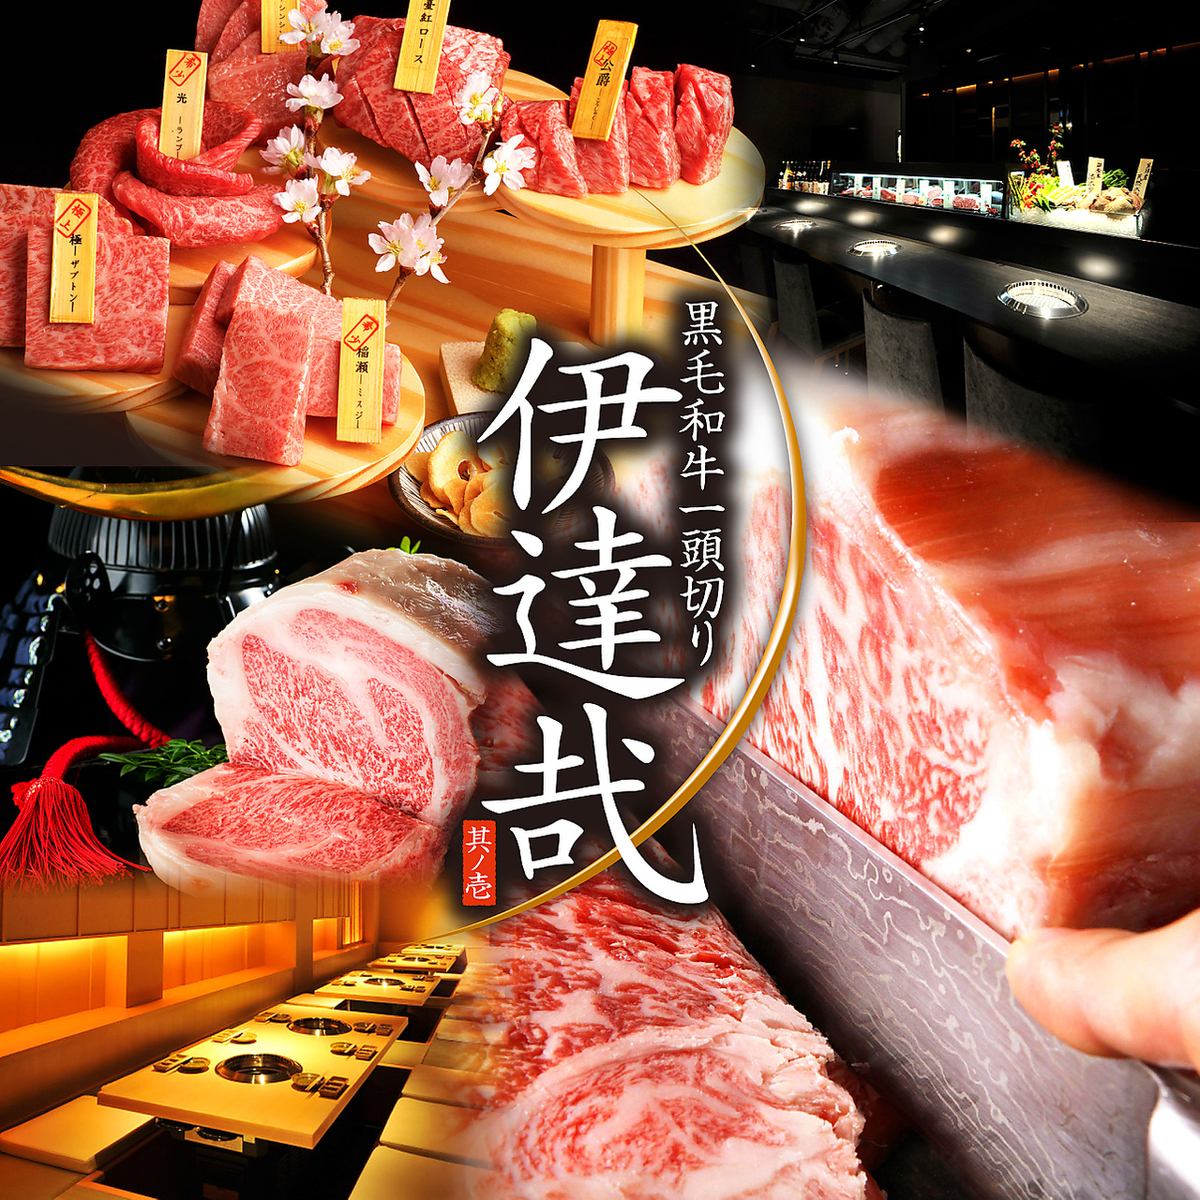 We offer ”Extreme Sendai Beef Date Black”, the pinnacle of Sendai Beef that the castle is proud of!